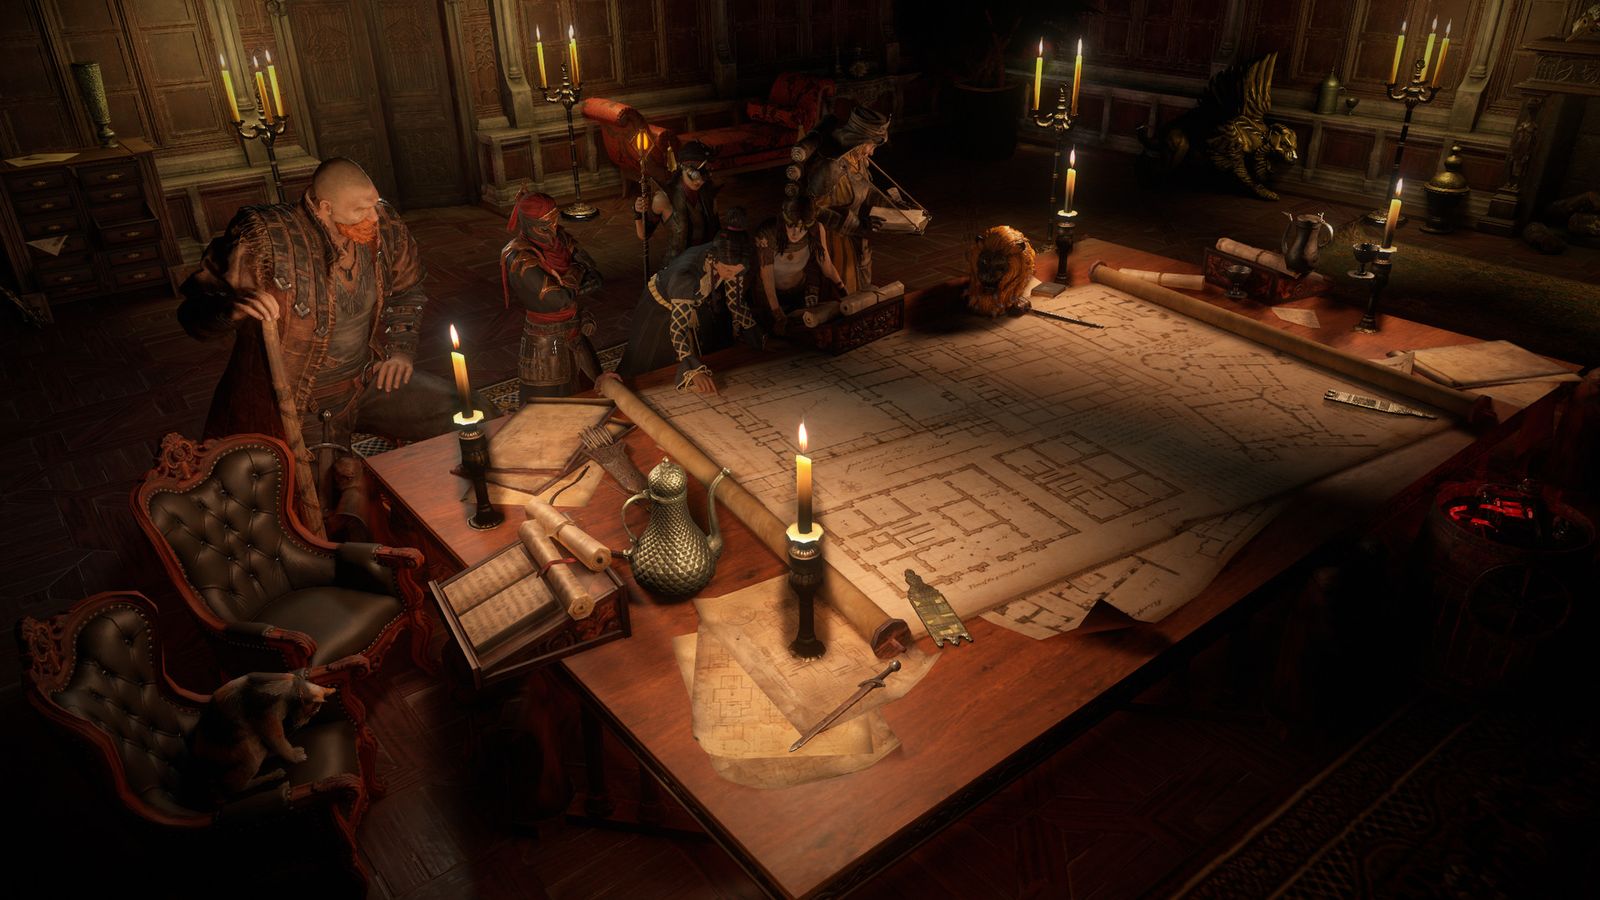 In-game image from Path of Exile of a group of characters reading a map spread out on a candle lit table.